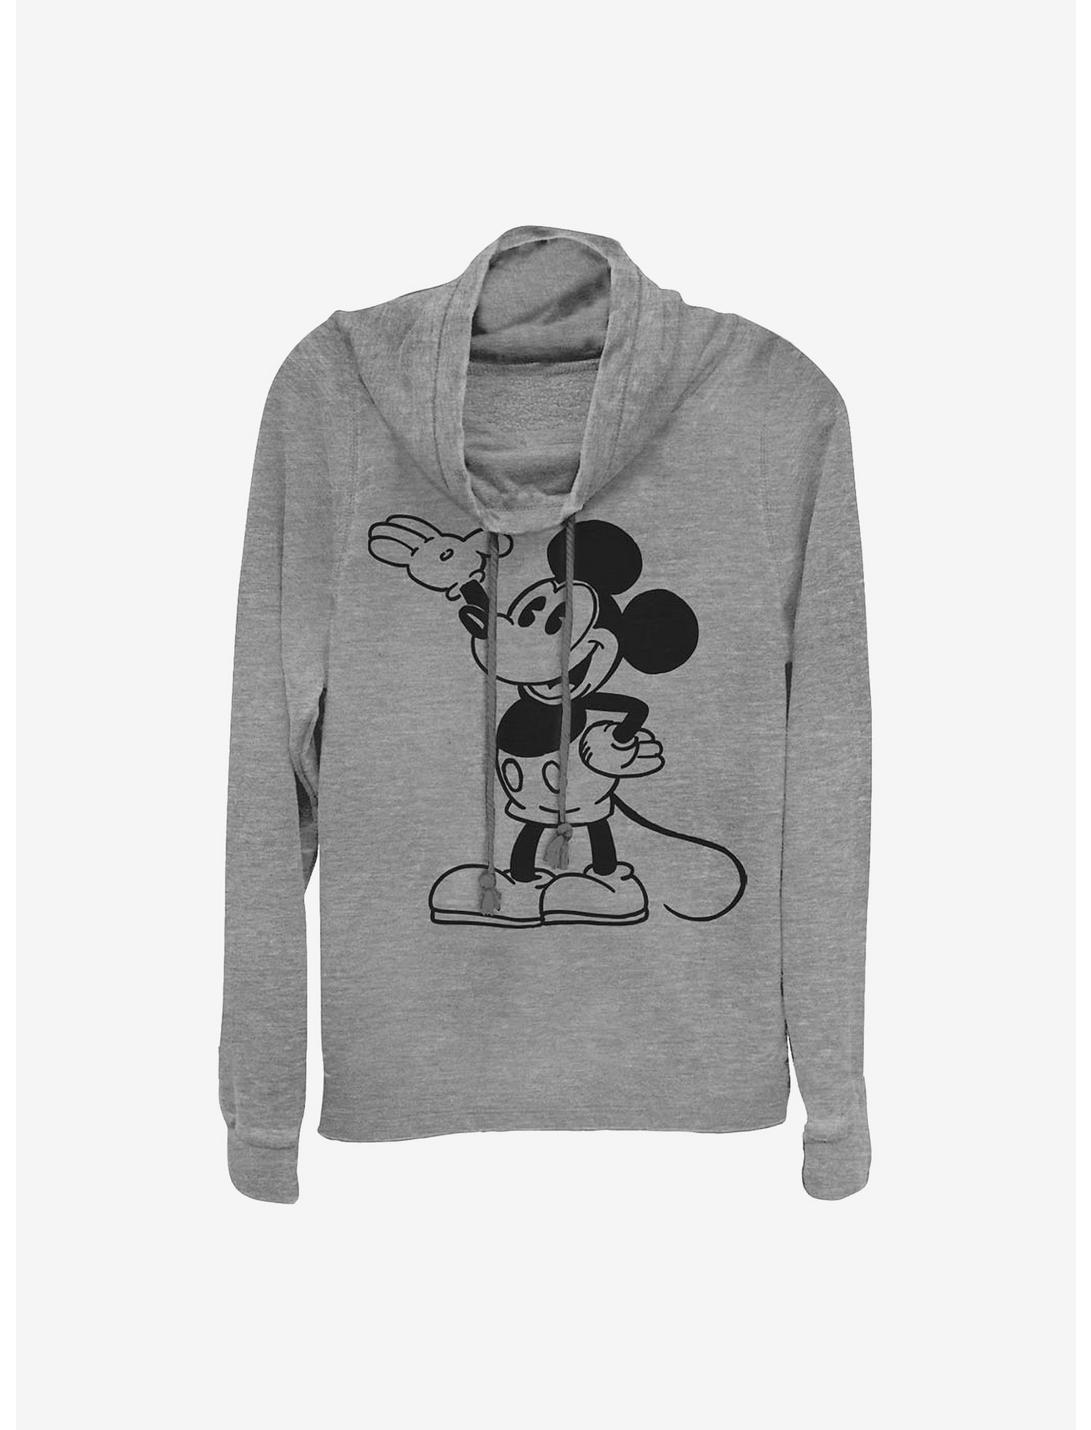 Disney Mickey Mouse Mickey Pose Cowl Neck Long-Sleeve Womens Top, GRAY HTR, hi-res